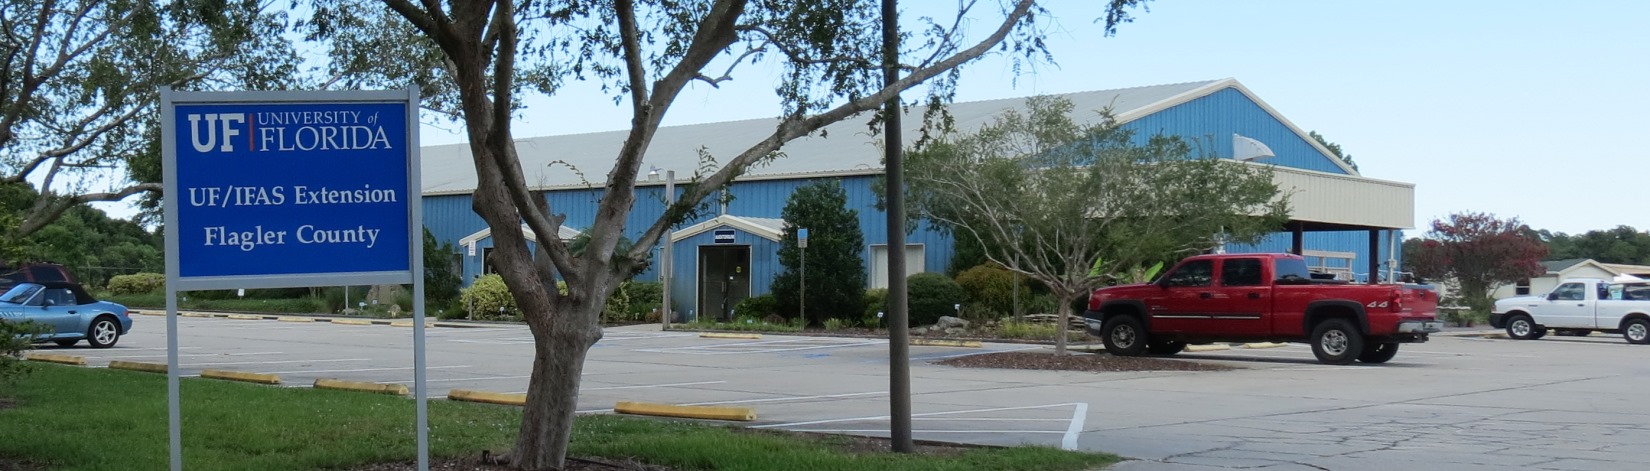 the front of the UF/IFAS Extension Flagler County office